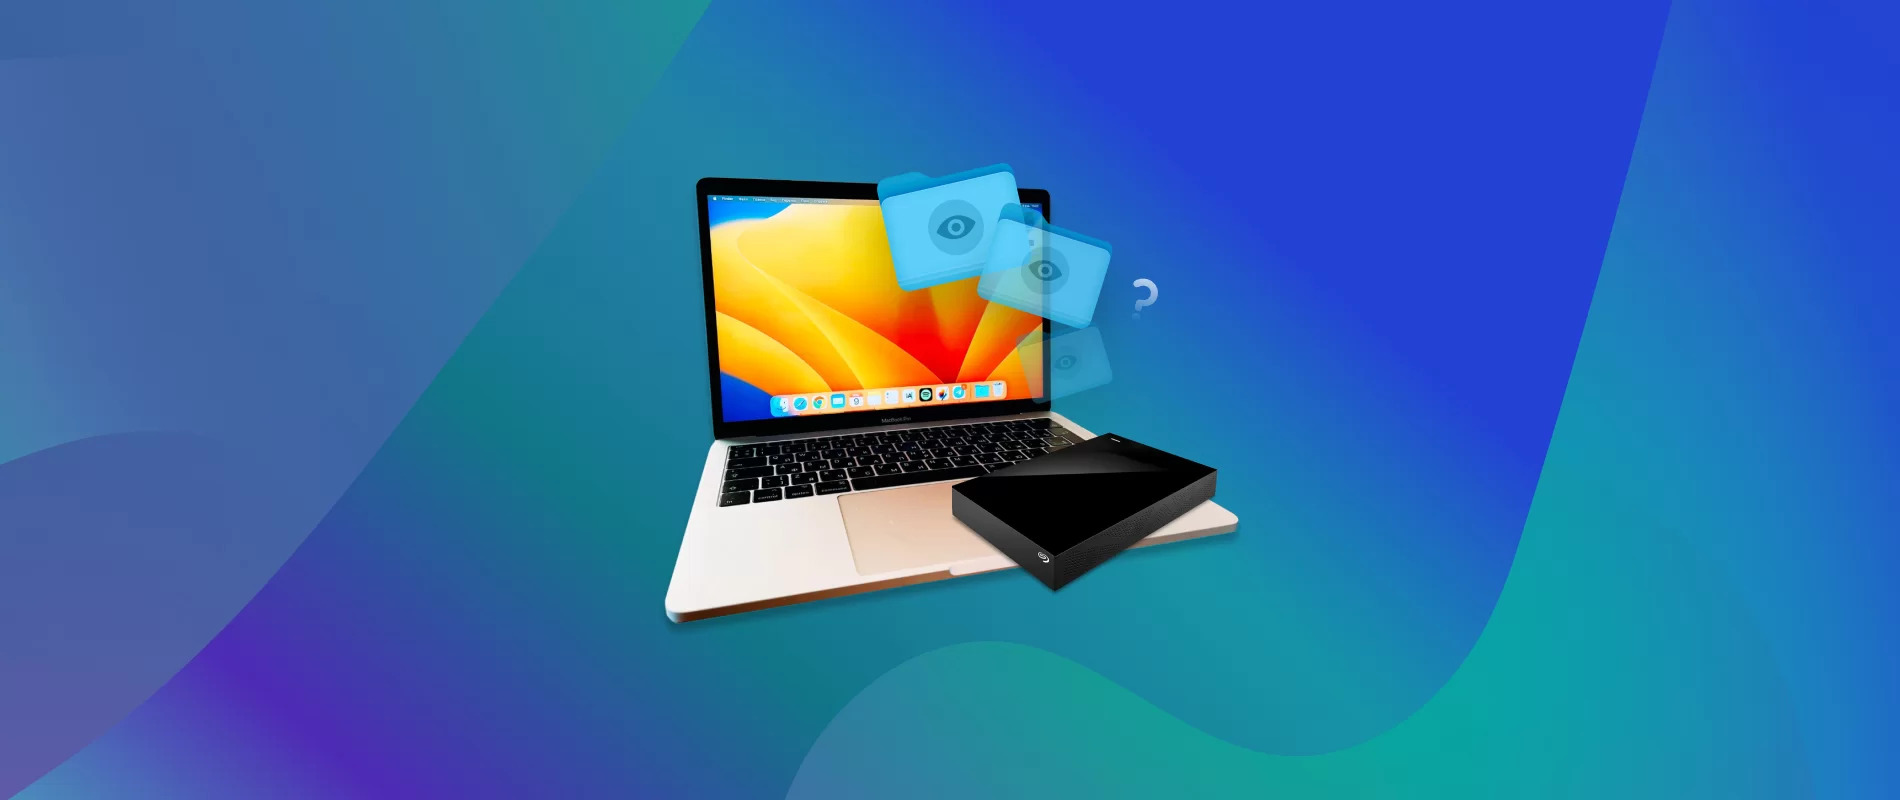 How To View Photos From External Hard Drive On Mac